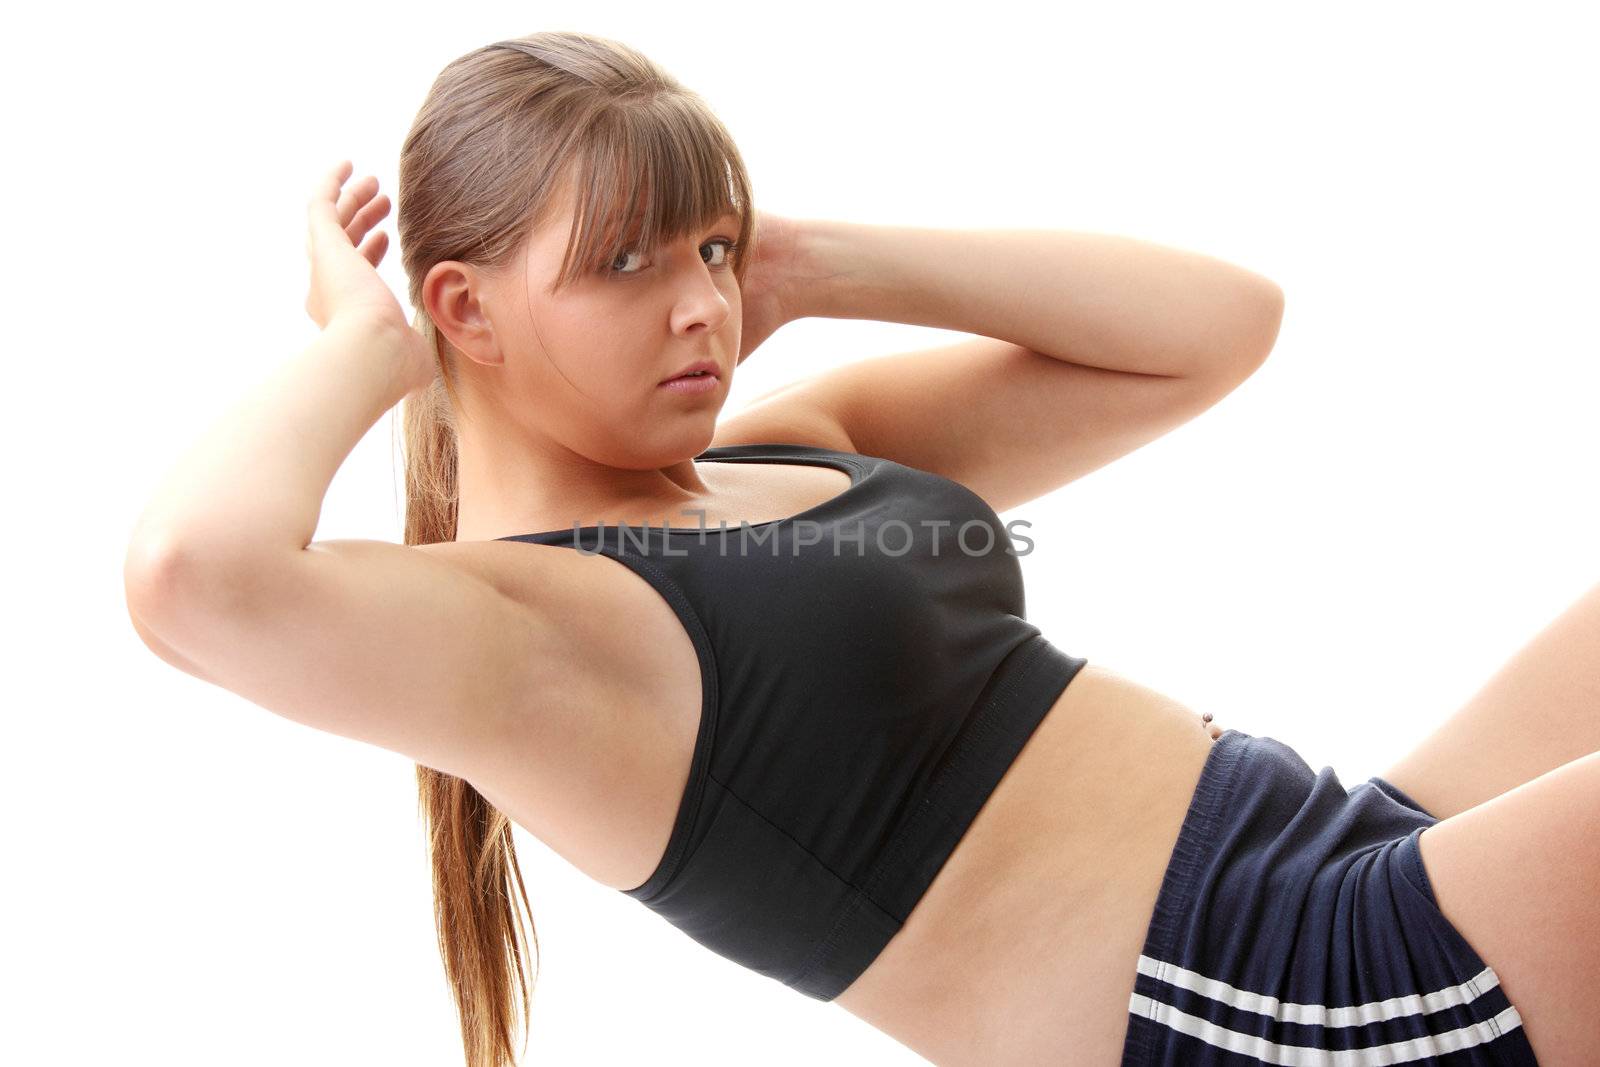 Relaxed fit woman doing exercise, isolated on white background.